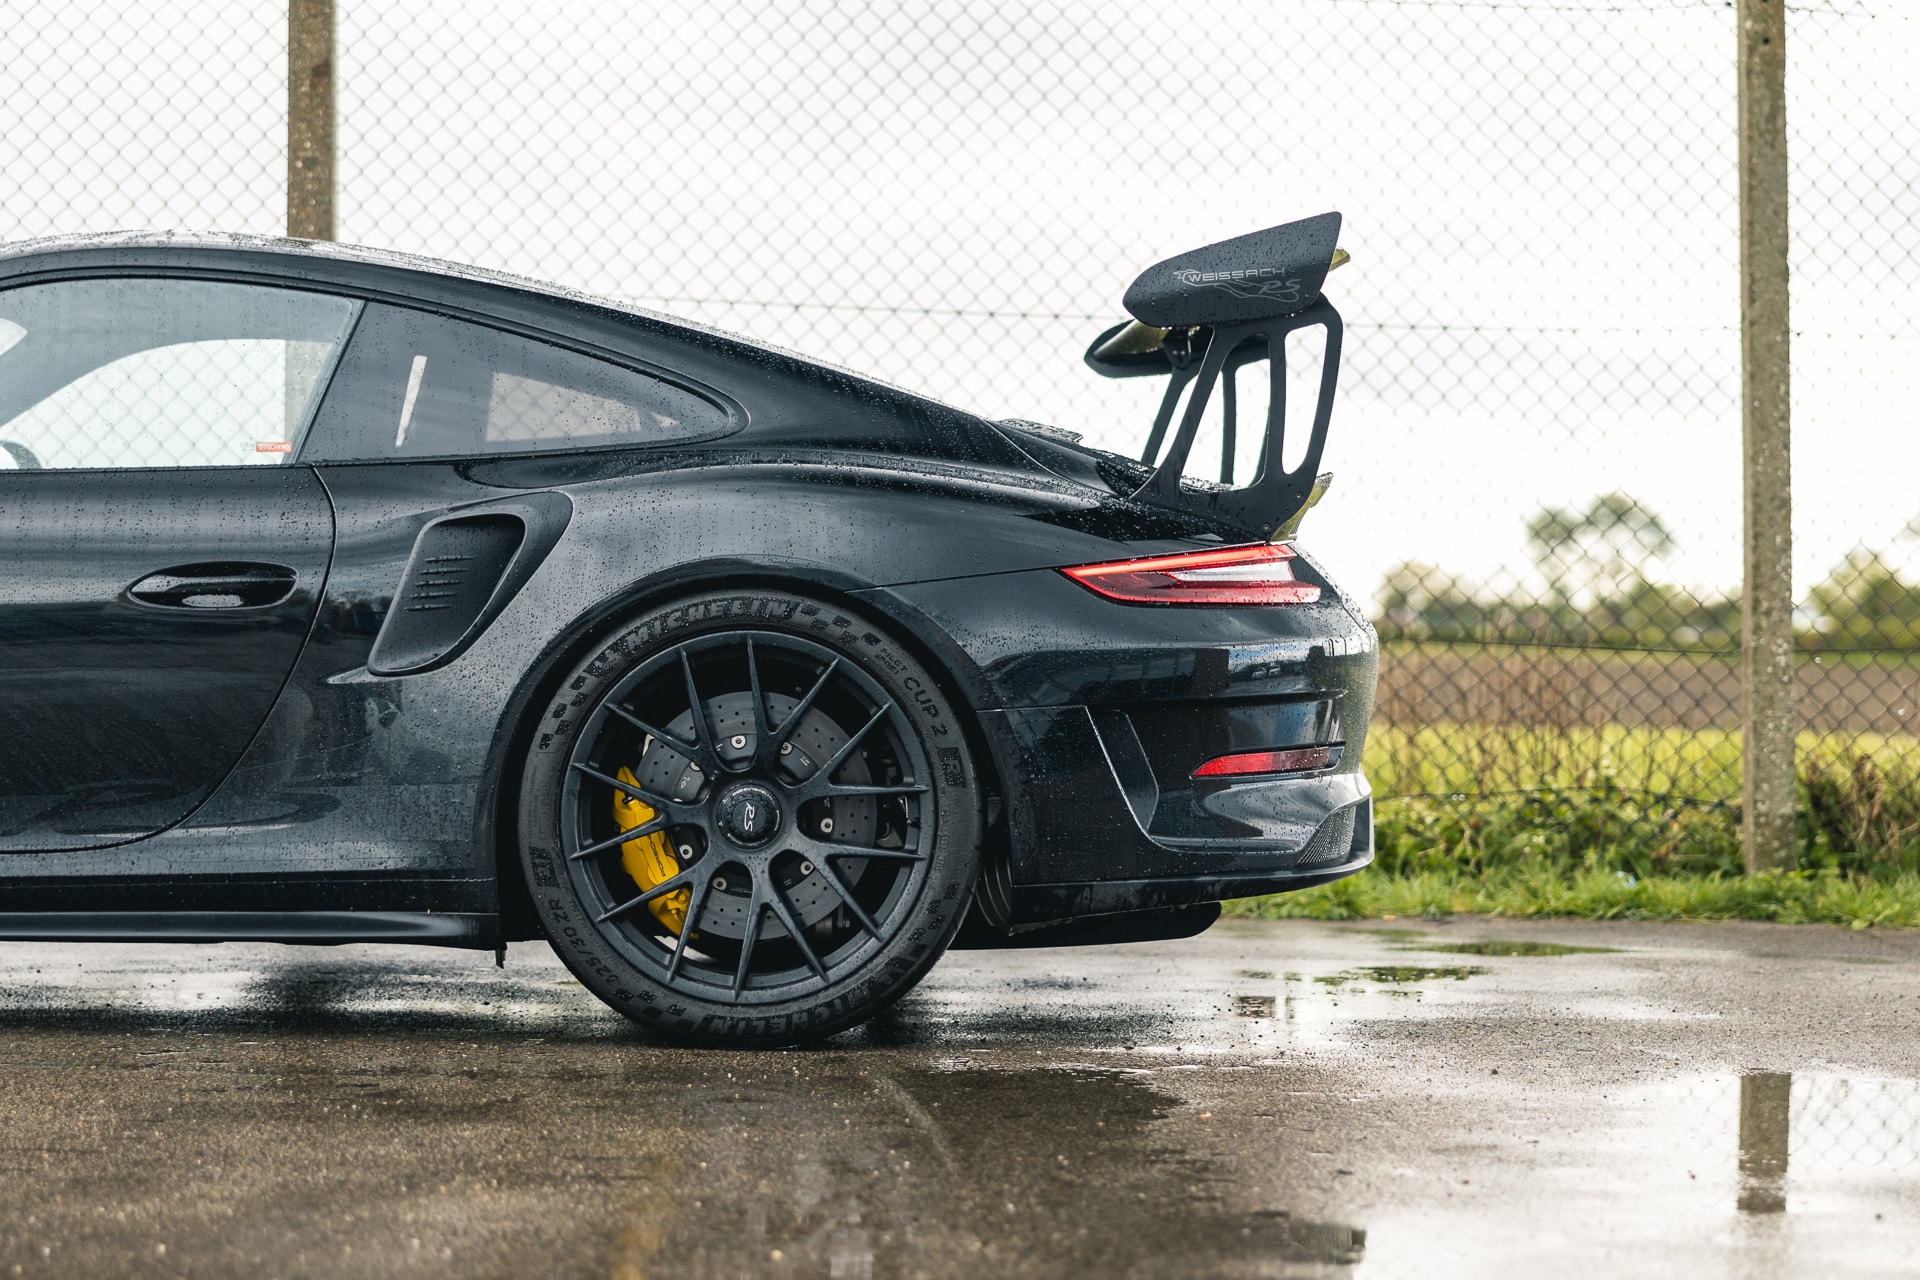 991.2 with Michelin Cup 2 R Tyres